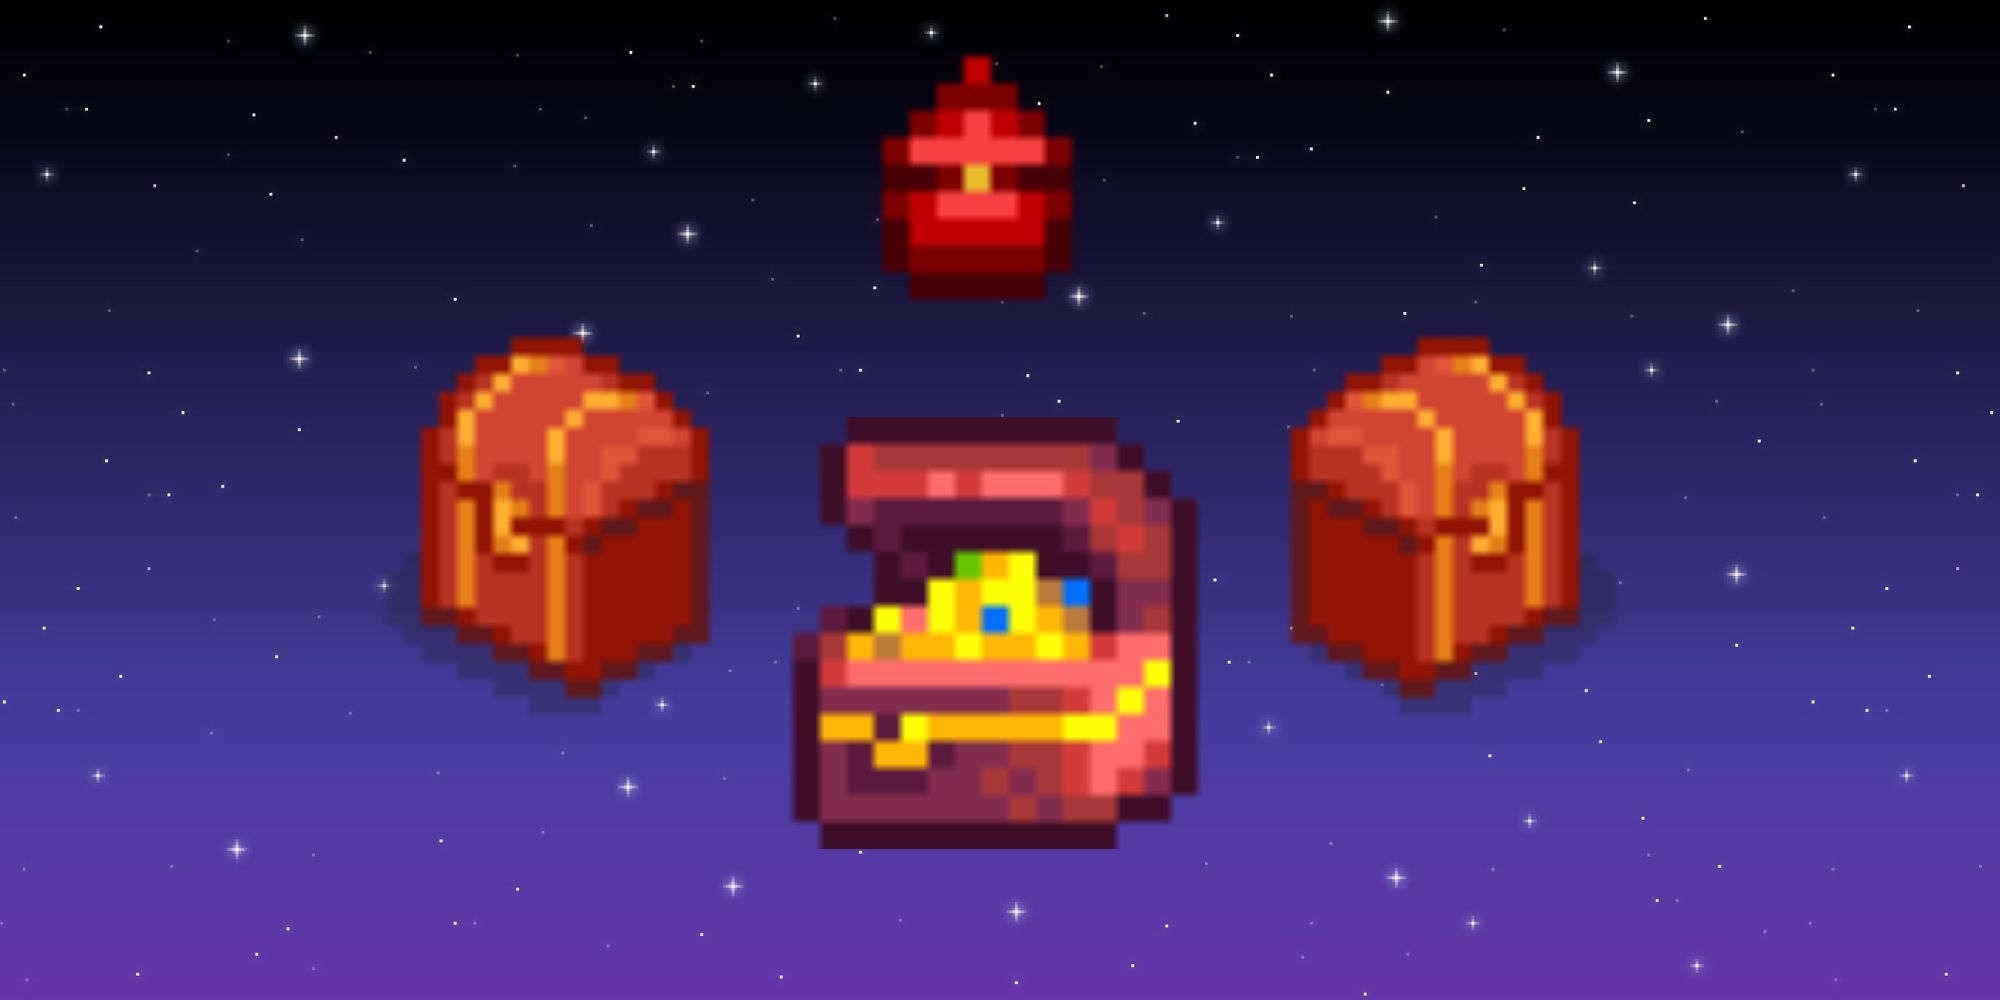 Stardew Valley: Two fishing treasure chests, an open treasure chest, and the treasure hunter bobber all arranged over a starry purple sky.